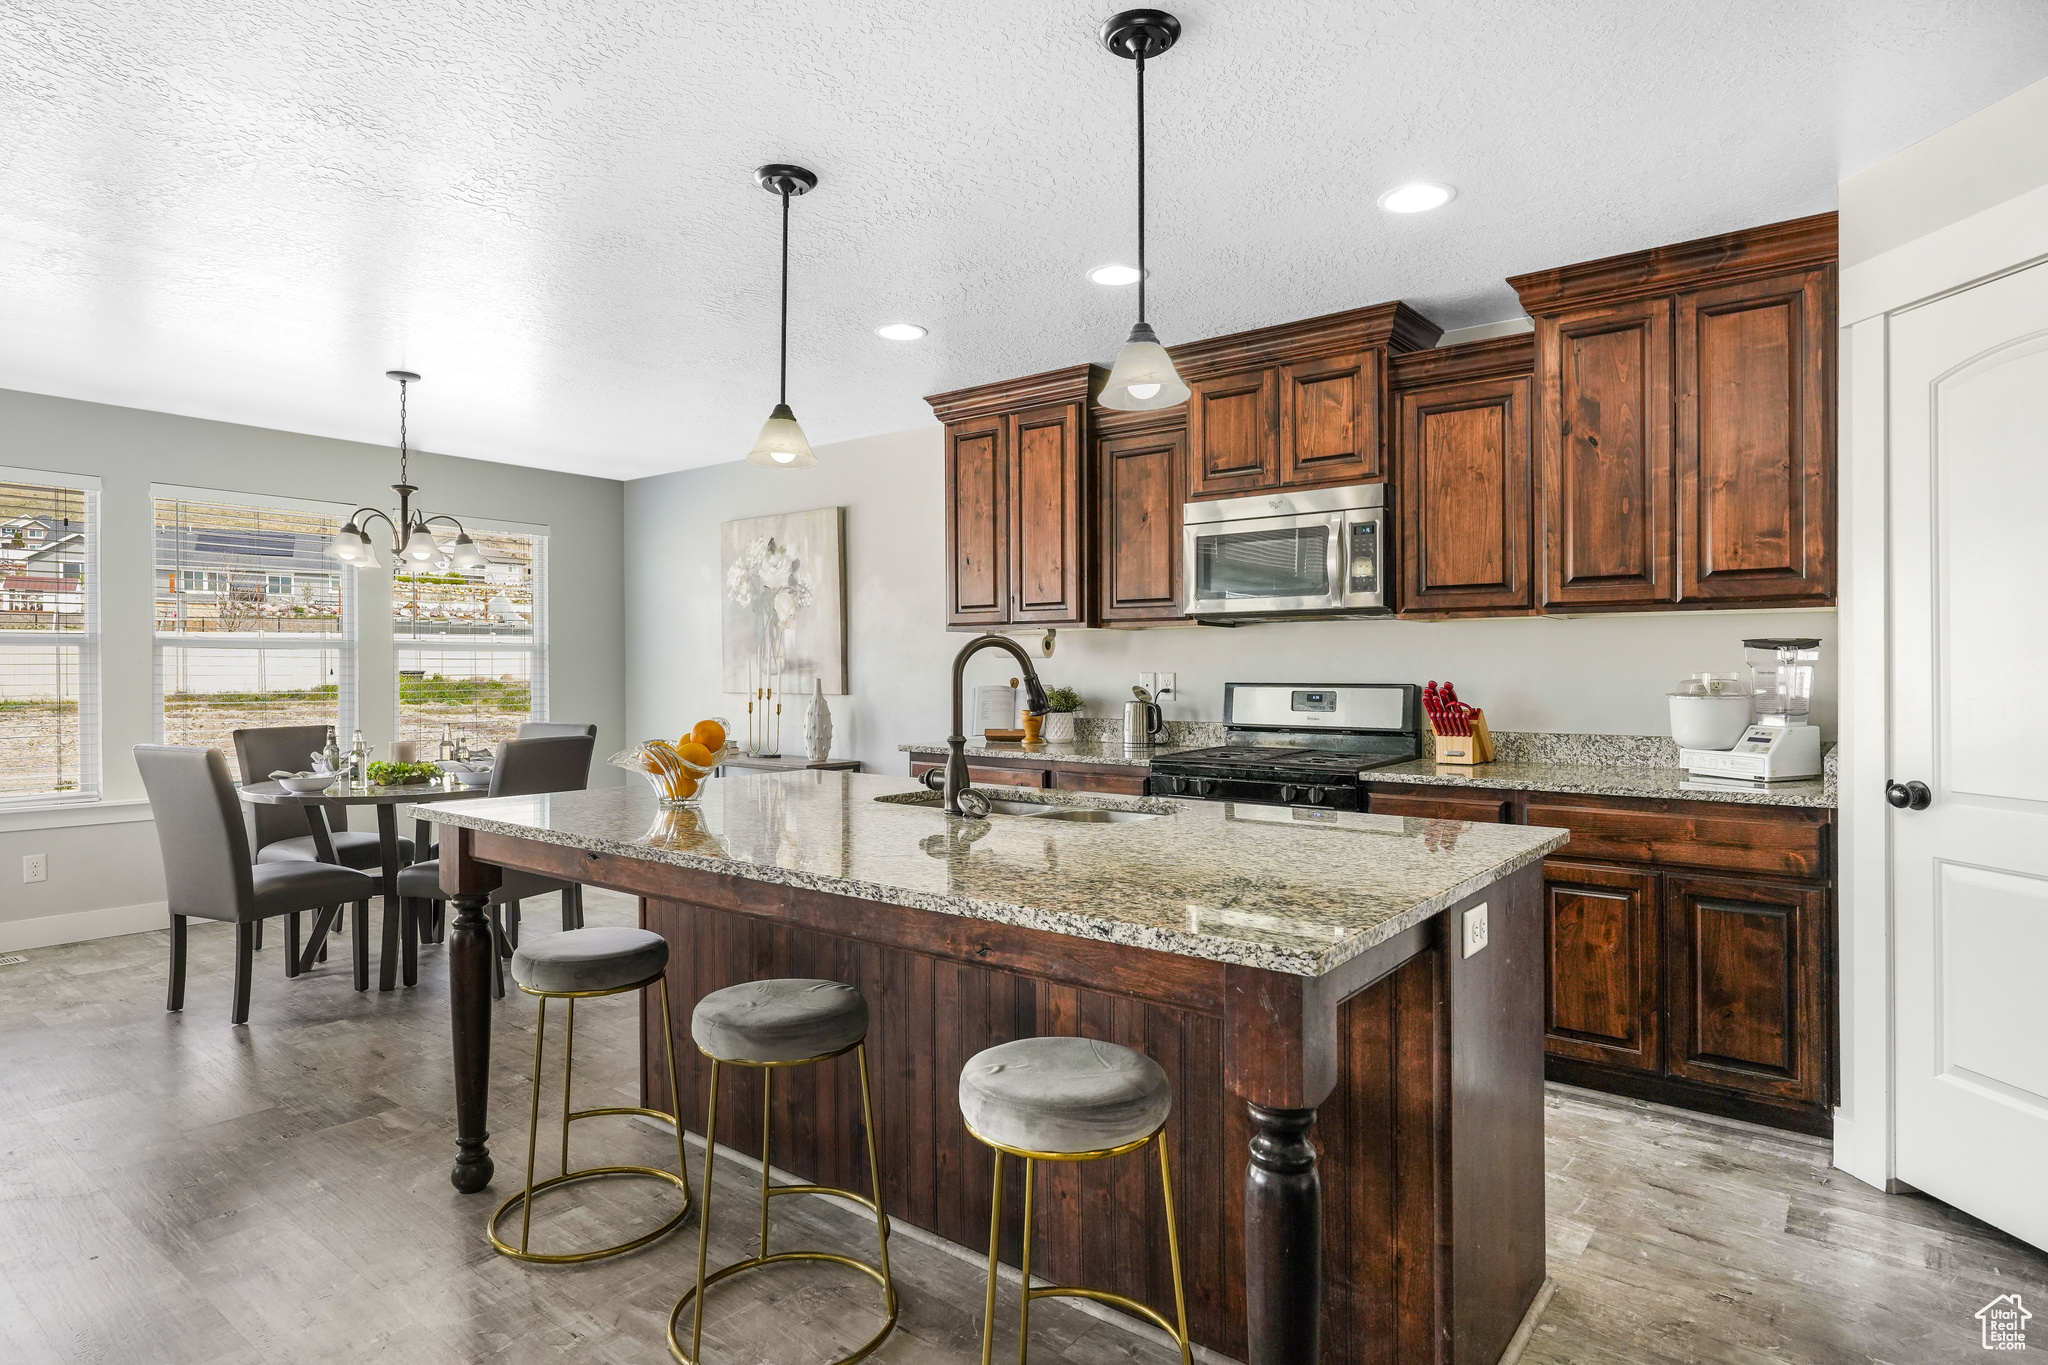 Gorgeous kitchen with stainless steel appliances, gas stove, and granite countertops